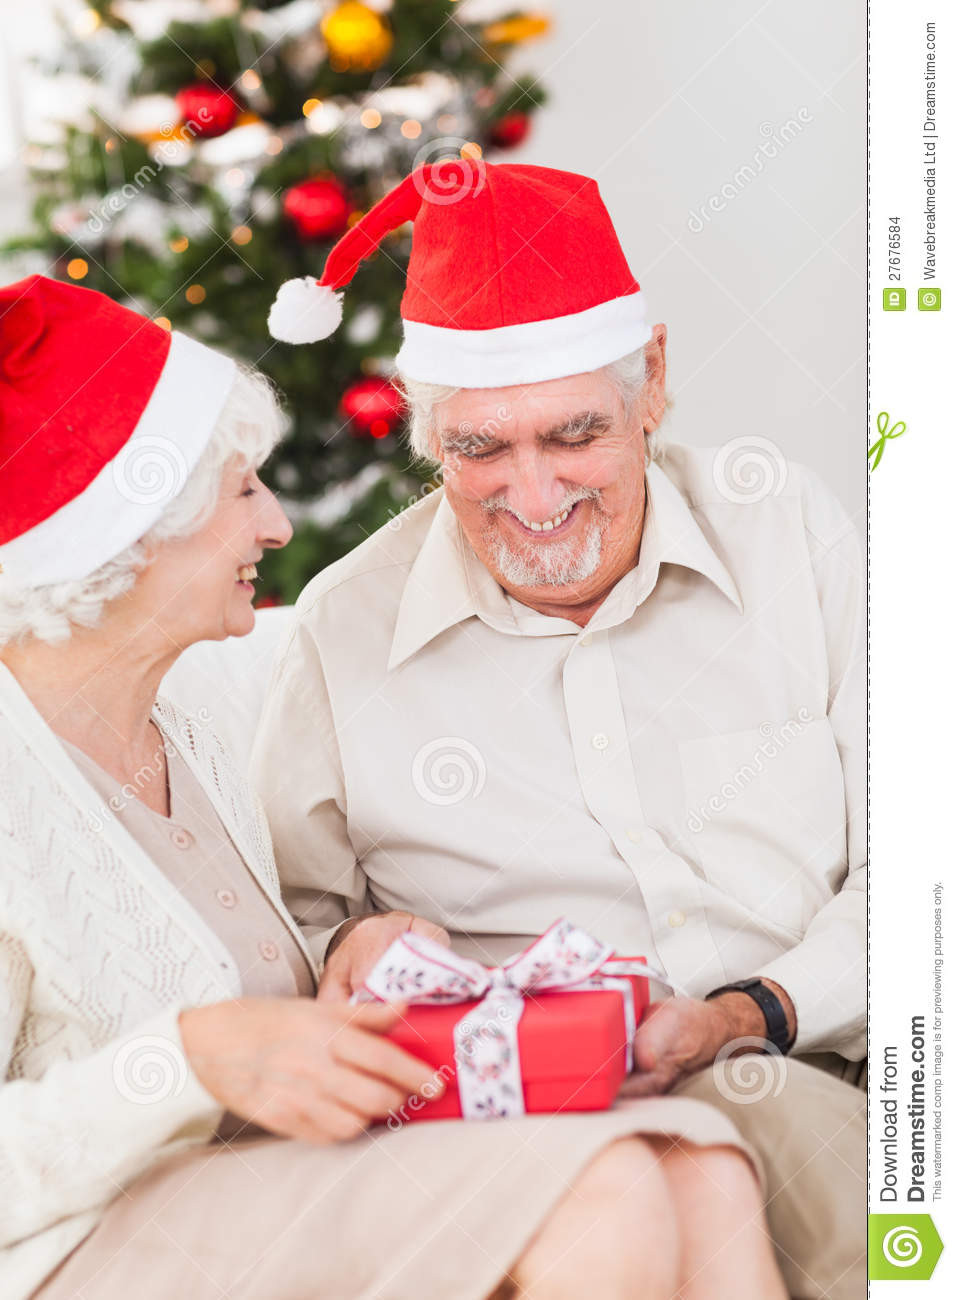 Christmas Gift Ideas For Older Couples
 Elderly Couple Swapping Christmas Presents Stock